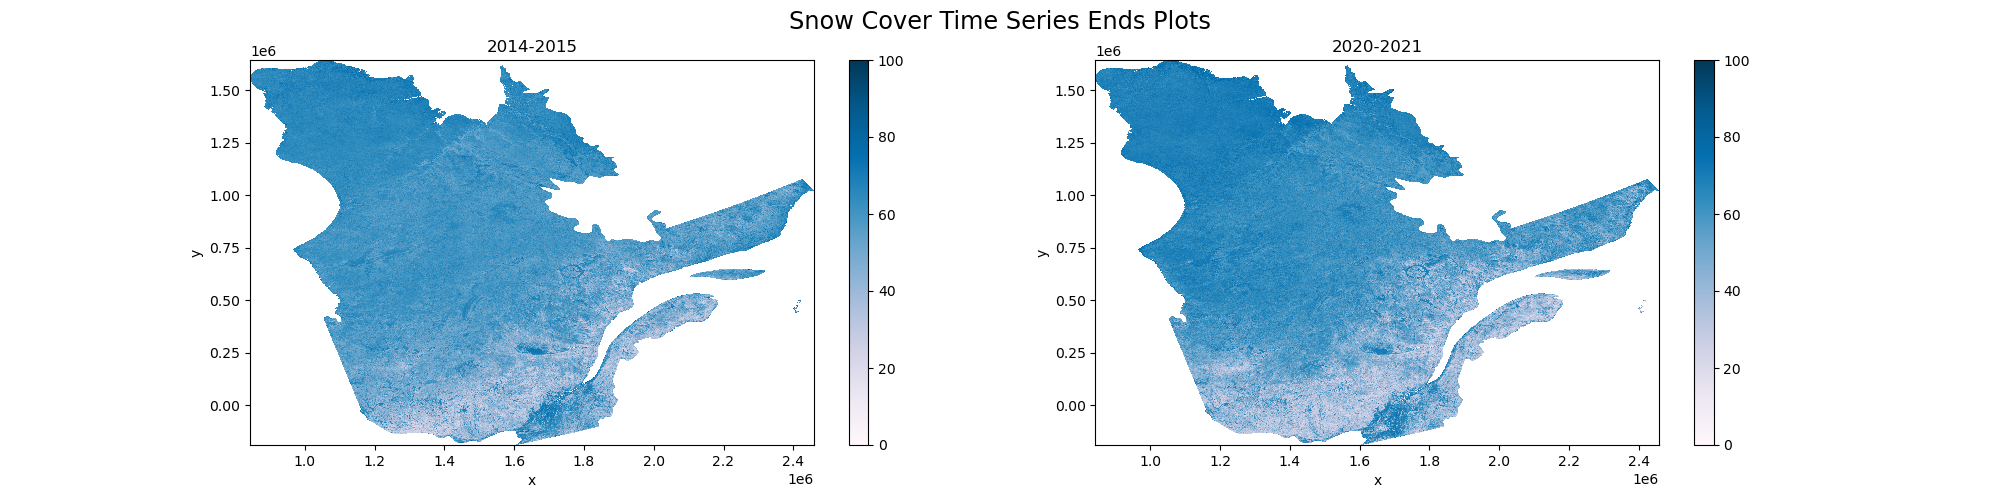 Snow-Cover-Time-Series-Ends-Plots